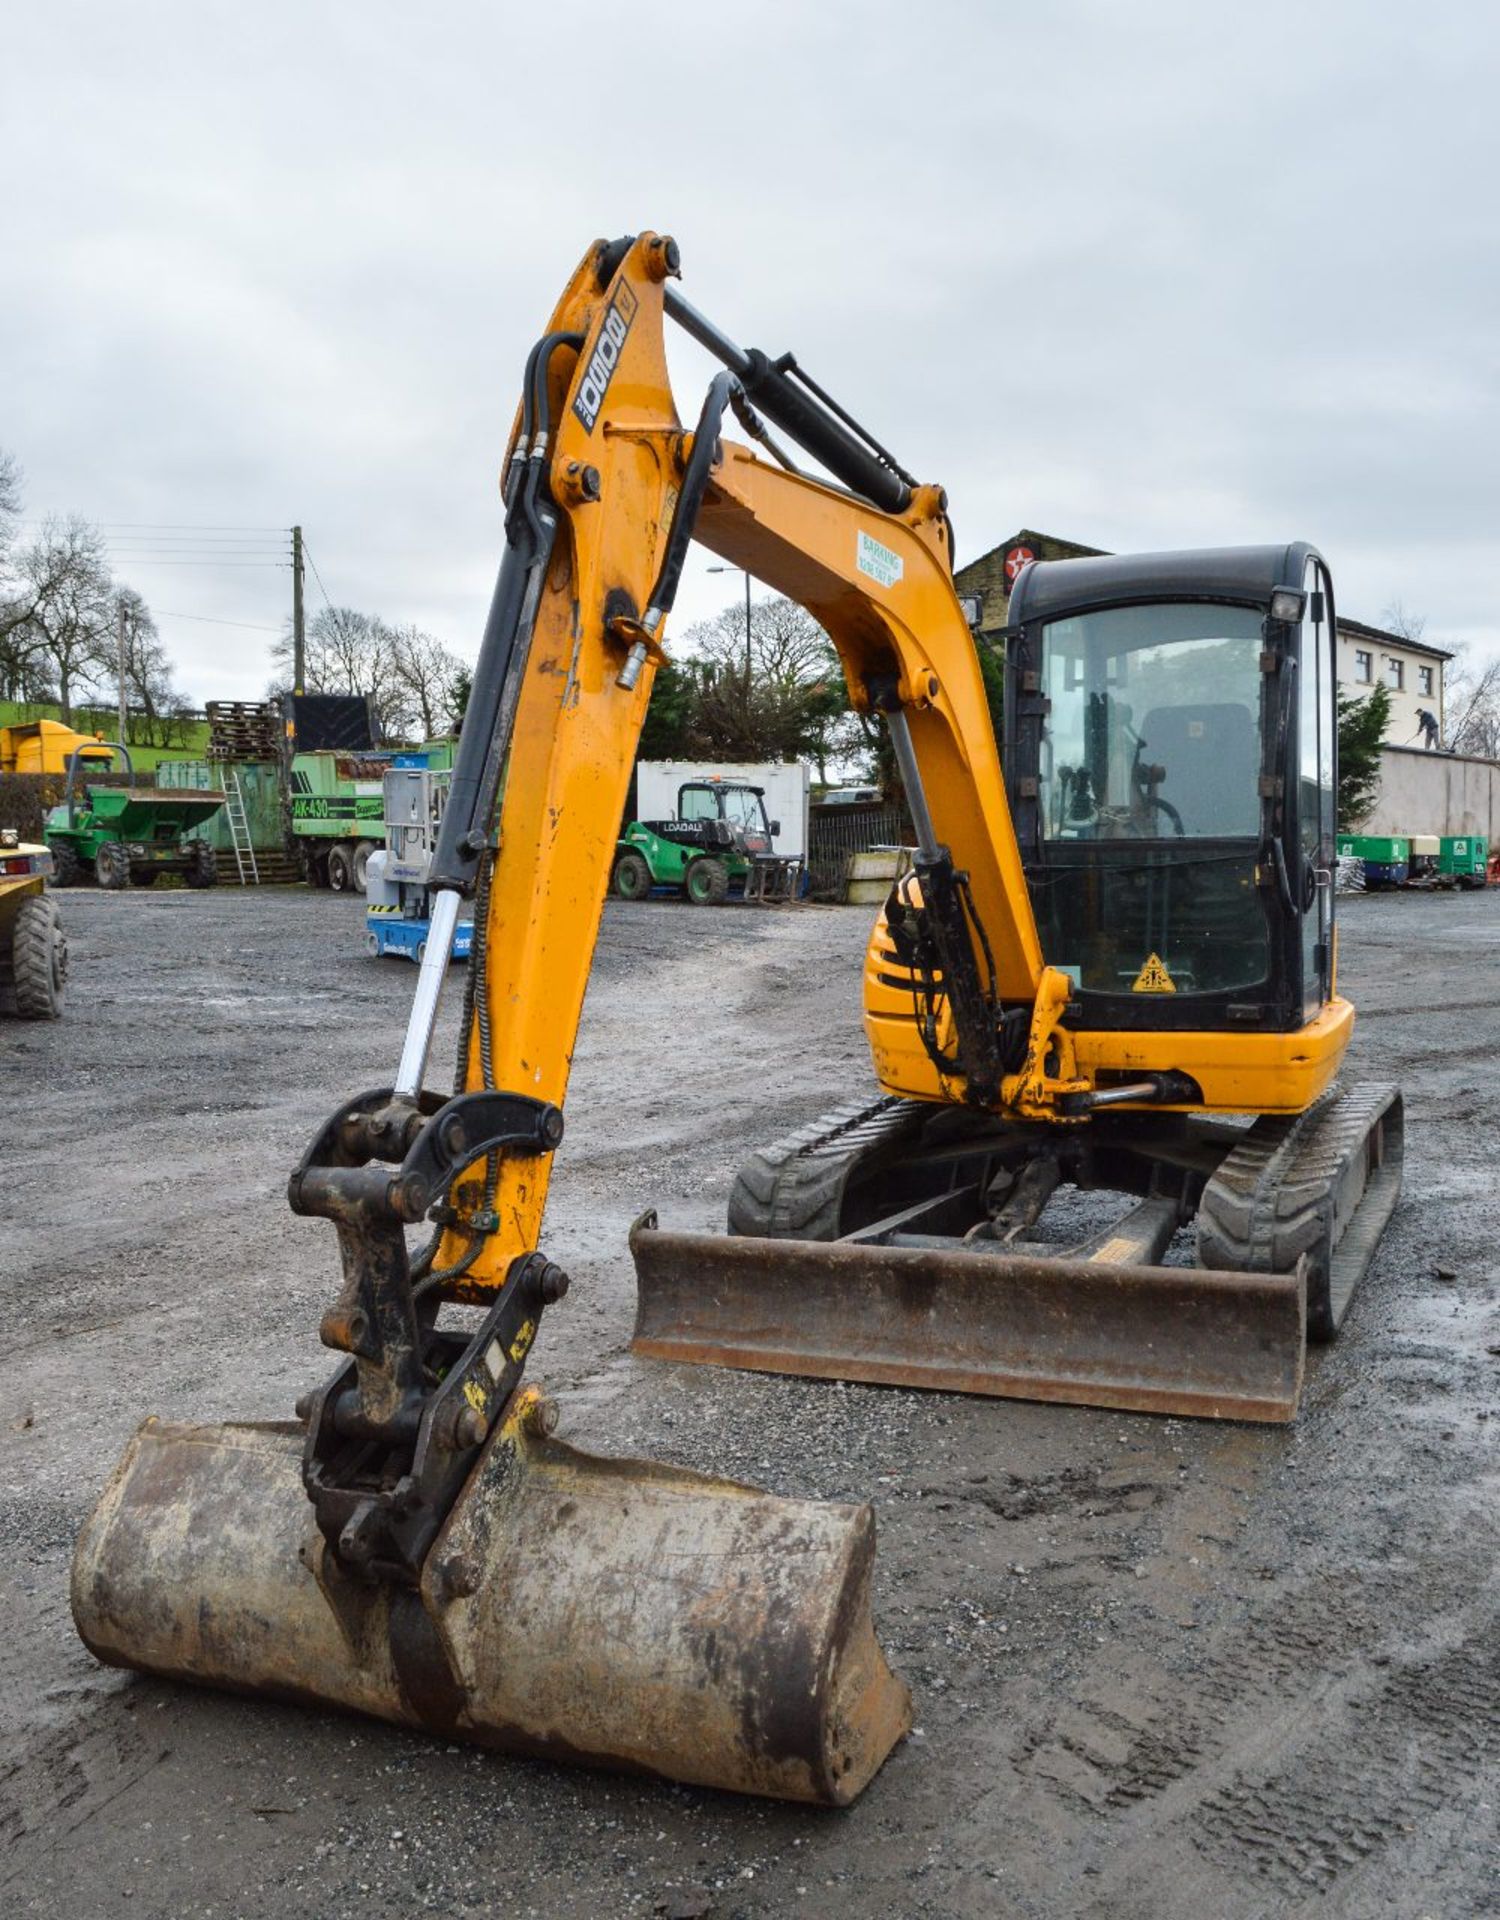 JCB 8050 RTS 5 tonne reduced tail swing rubber tracked mini excavator
Year: 2011
S/N: 1741664 - Image 5 of 12